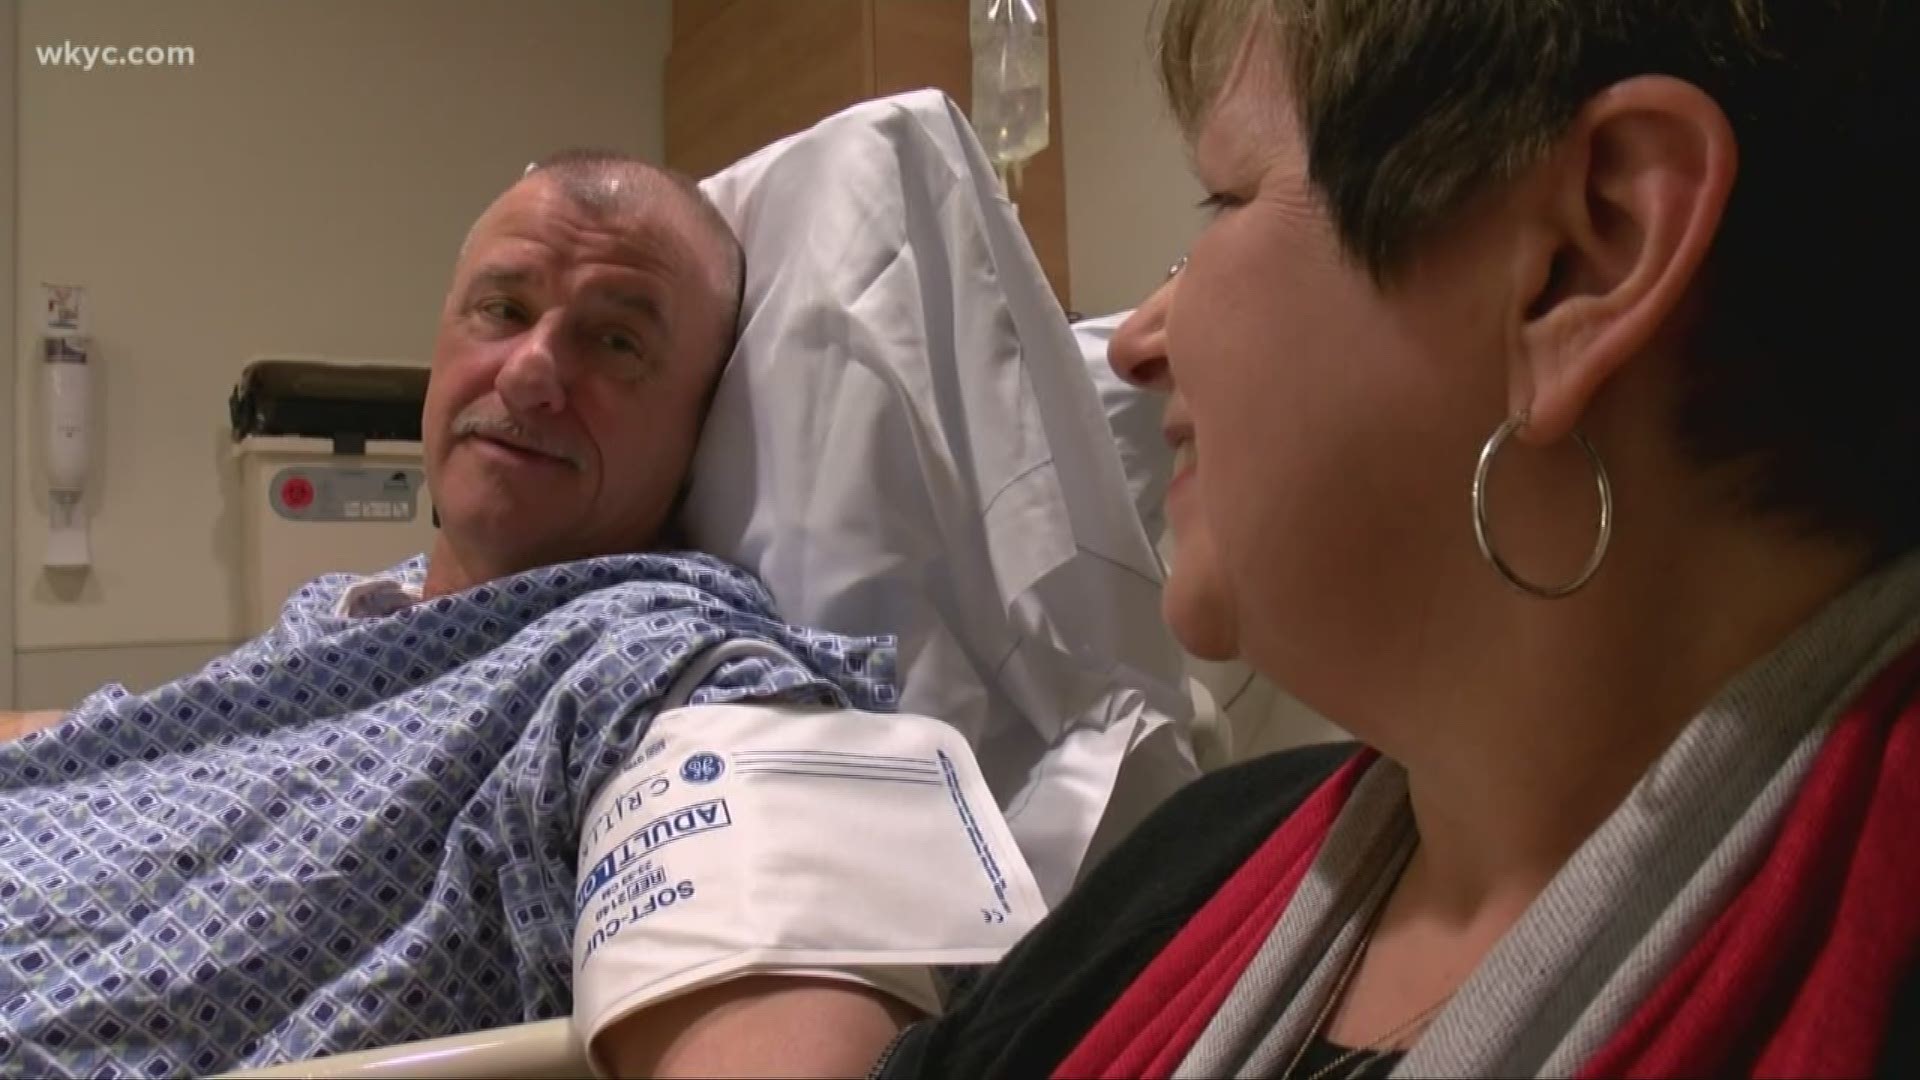 John Hiscox was supposed to retire on Valentine’s Day and share the night with his wife. Instead, he underwent lifesaving bypass surgery. Monica Robins reports.